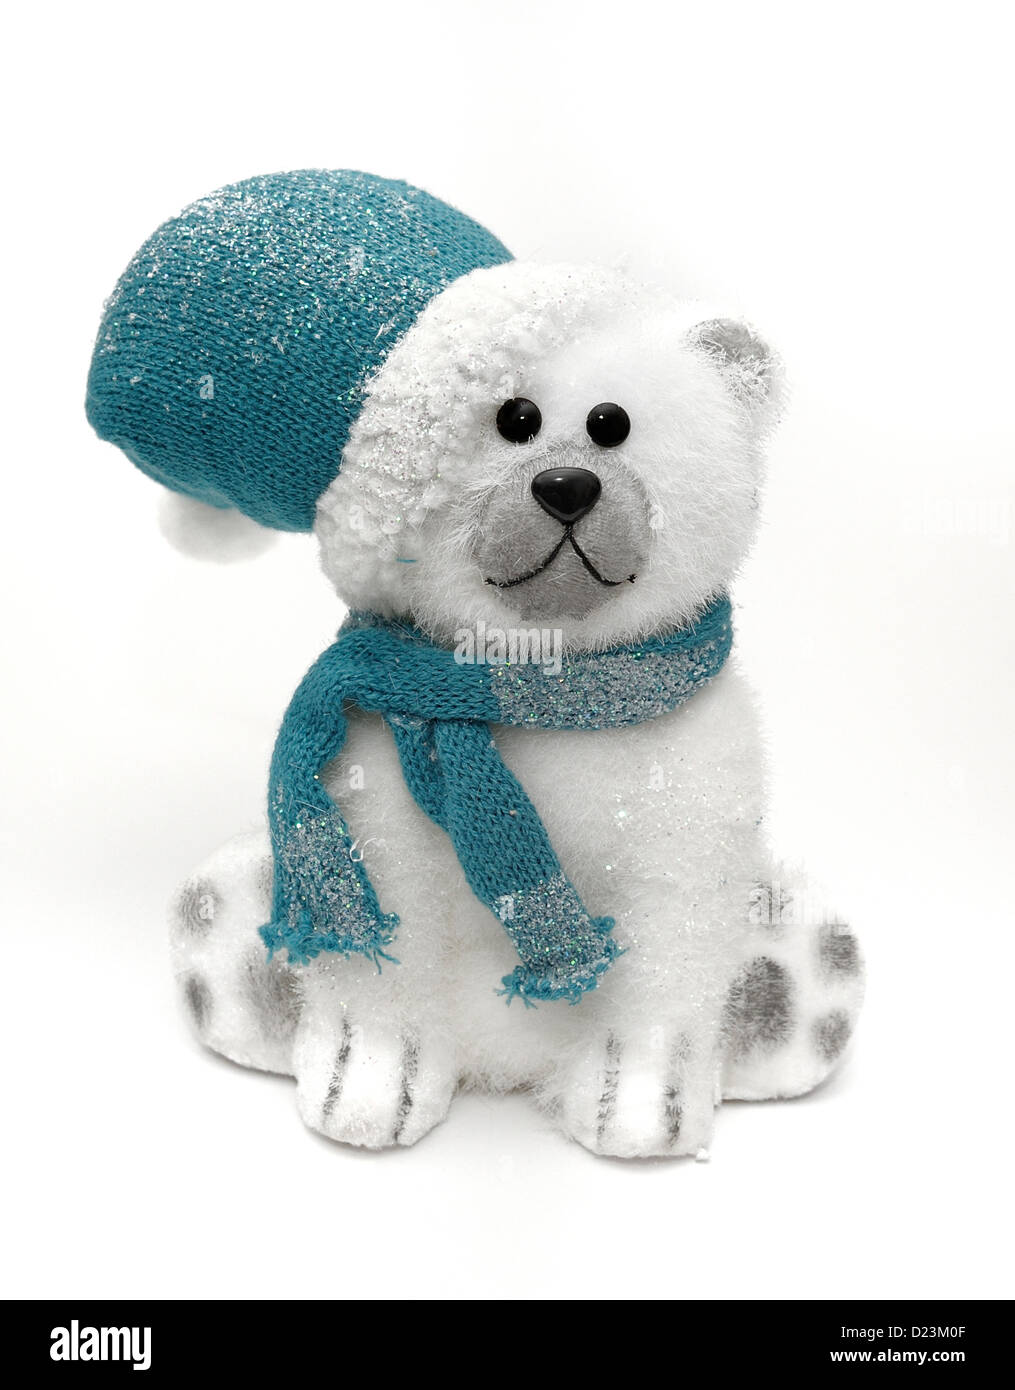 polar bear in blue hat and scarf Stock Photo